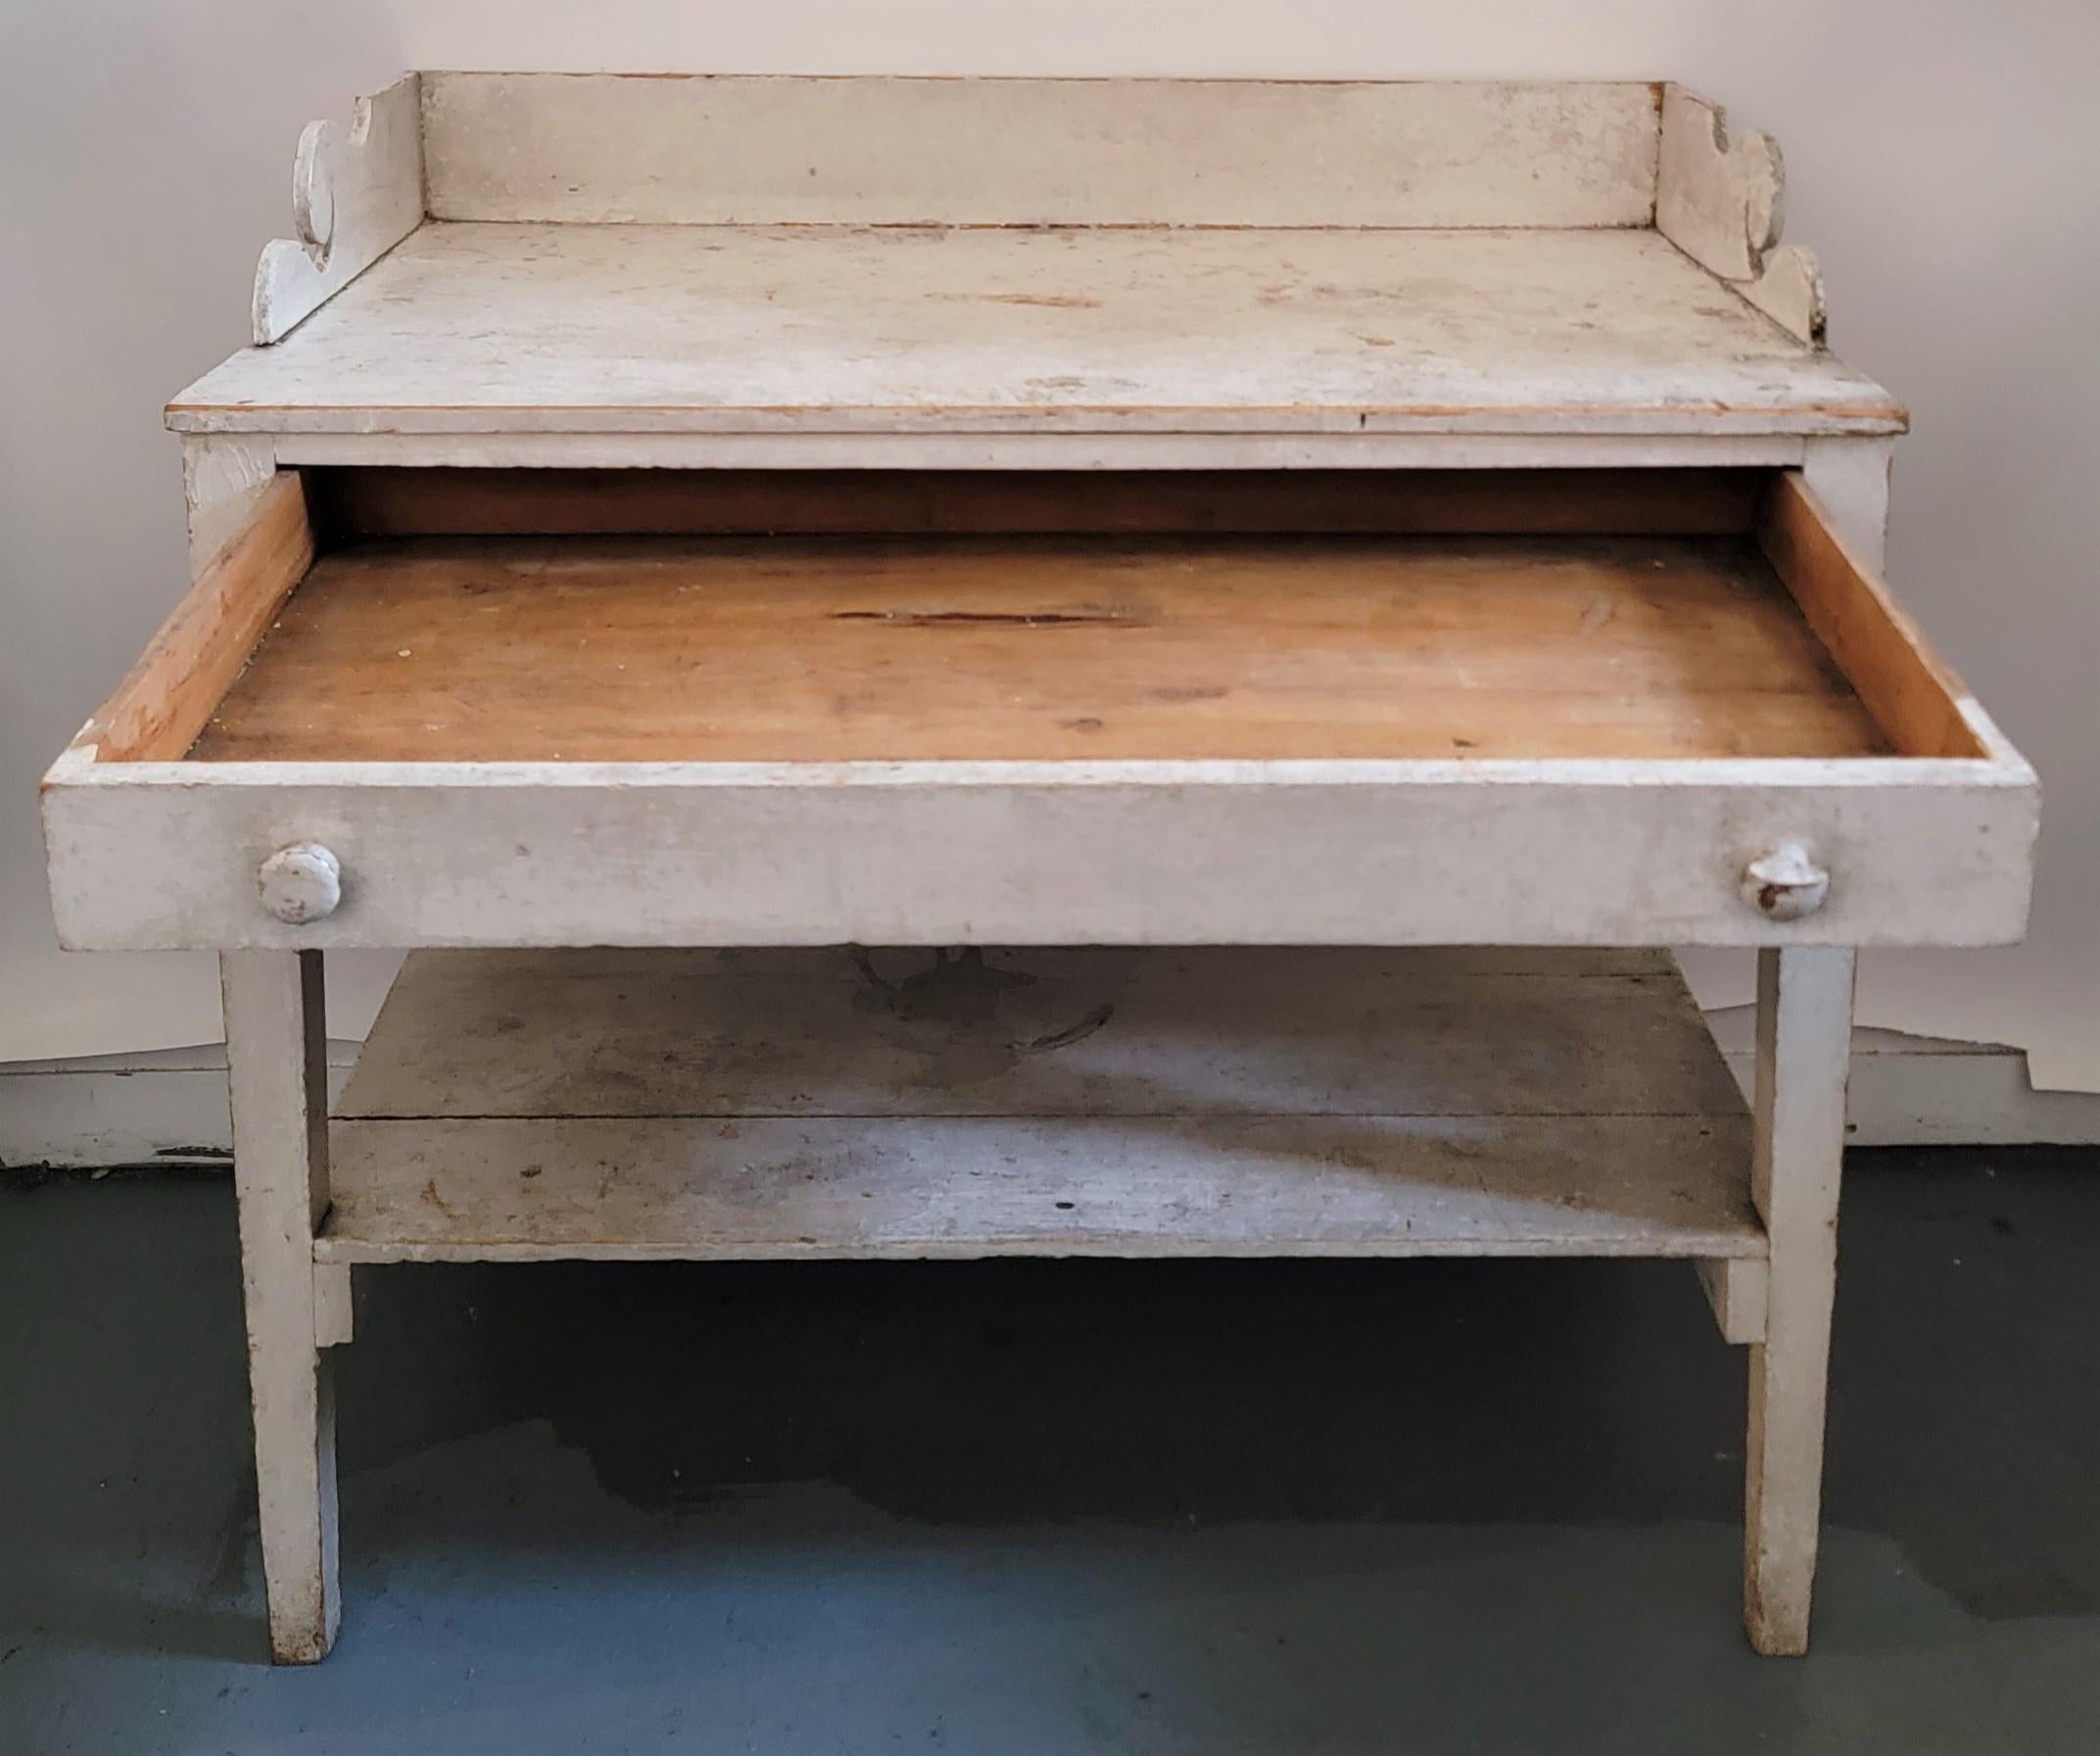 19th c Original white painted side table or server with one drawer. This finely made table has great details as a dovetail case and fantastic fine cut outs on the top case.The legs are taper and fine detailed.The condition is good and sturdy.